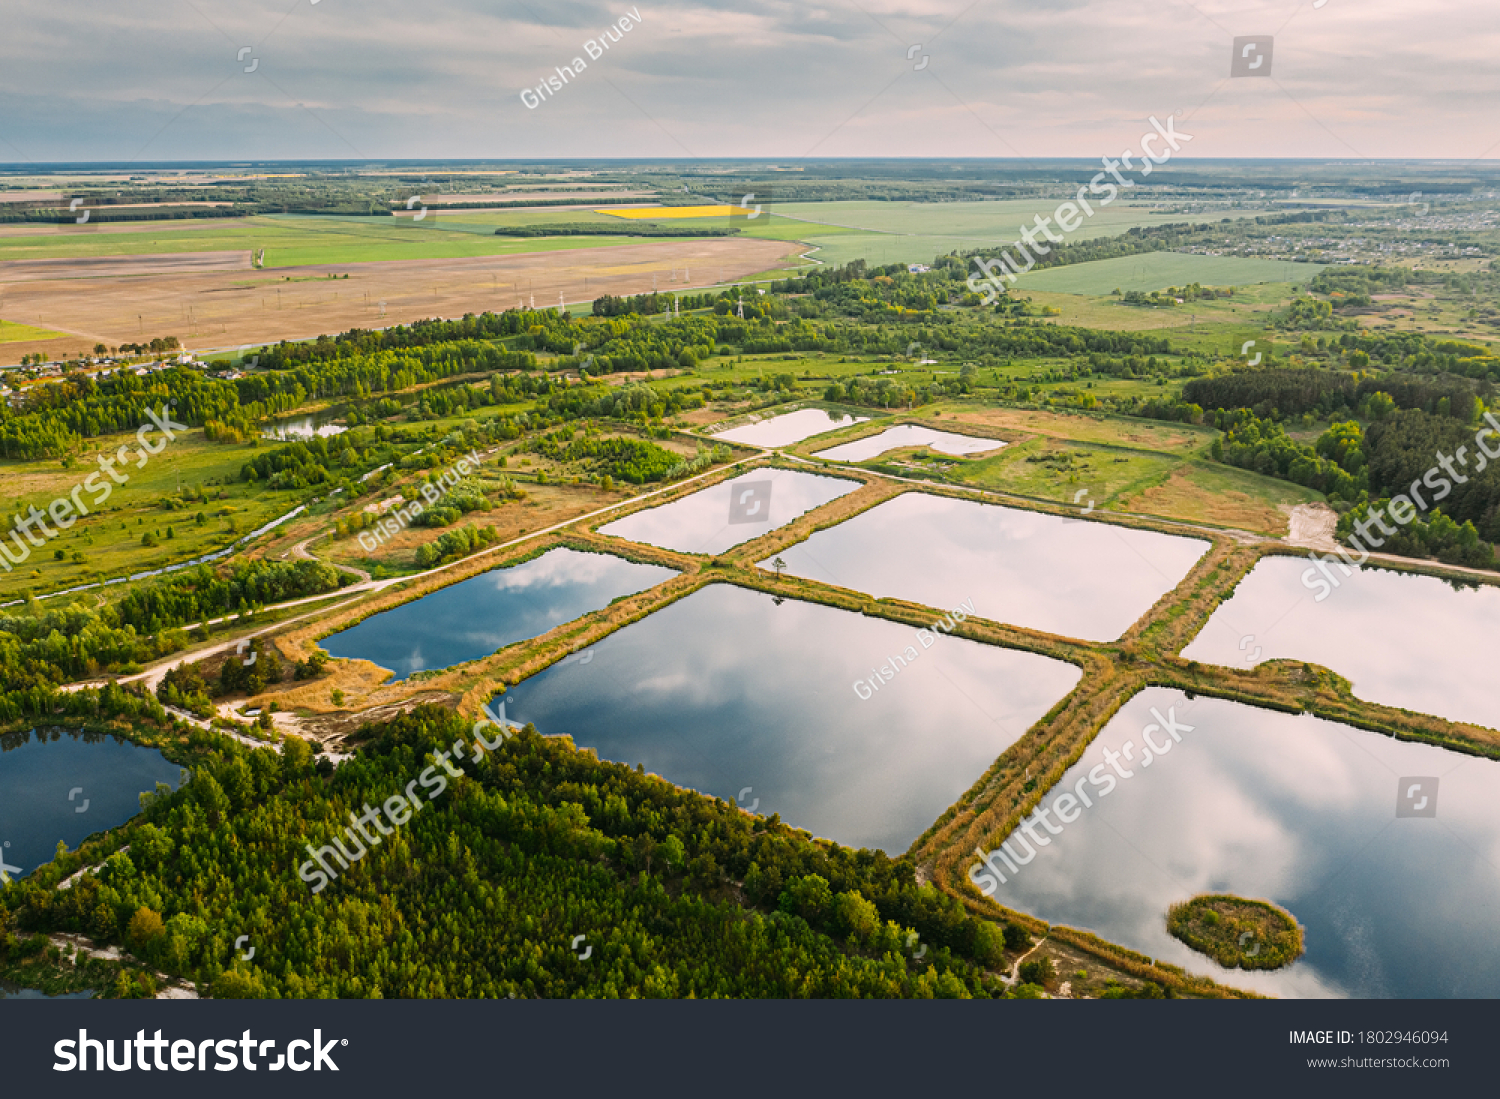 Aerial View Retention Basins, Wet Pond, Wet Detention Basin Or Stormwater Management Pond, Is An Artificial Pond With Vegetation Around The Perimeter, And Includes A Permanent Pool Of Water In Its #1802946094